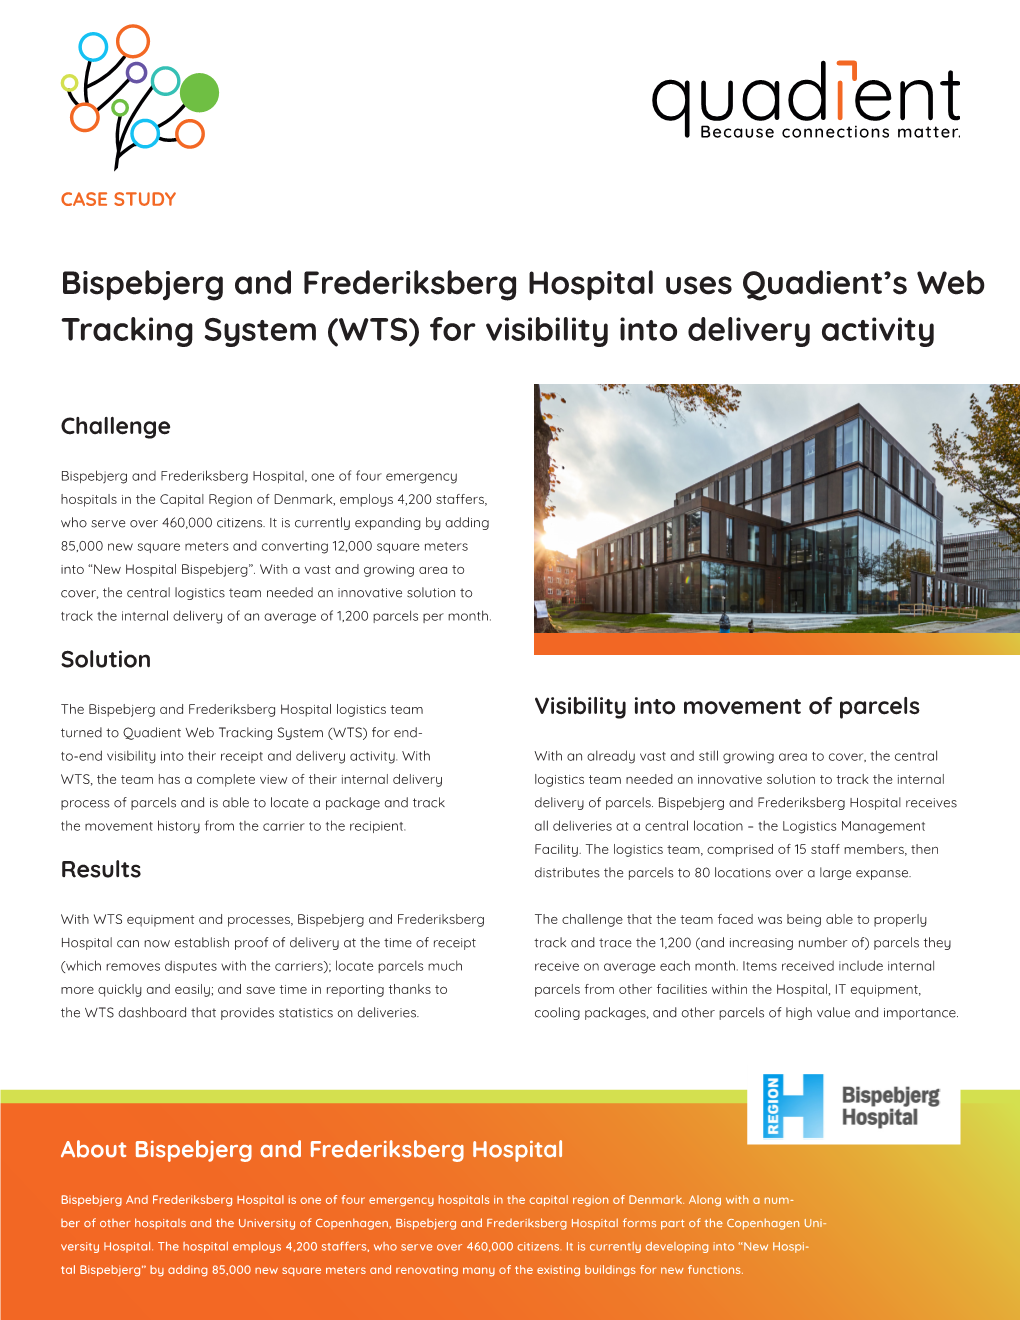 Bispebjerg and Frederiksberg Hospital Uses Quadient’S Web Tracking System (WTS) for Visibility Into Delivery Activity